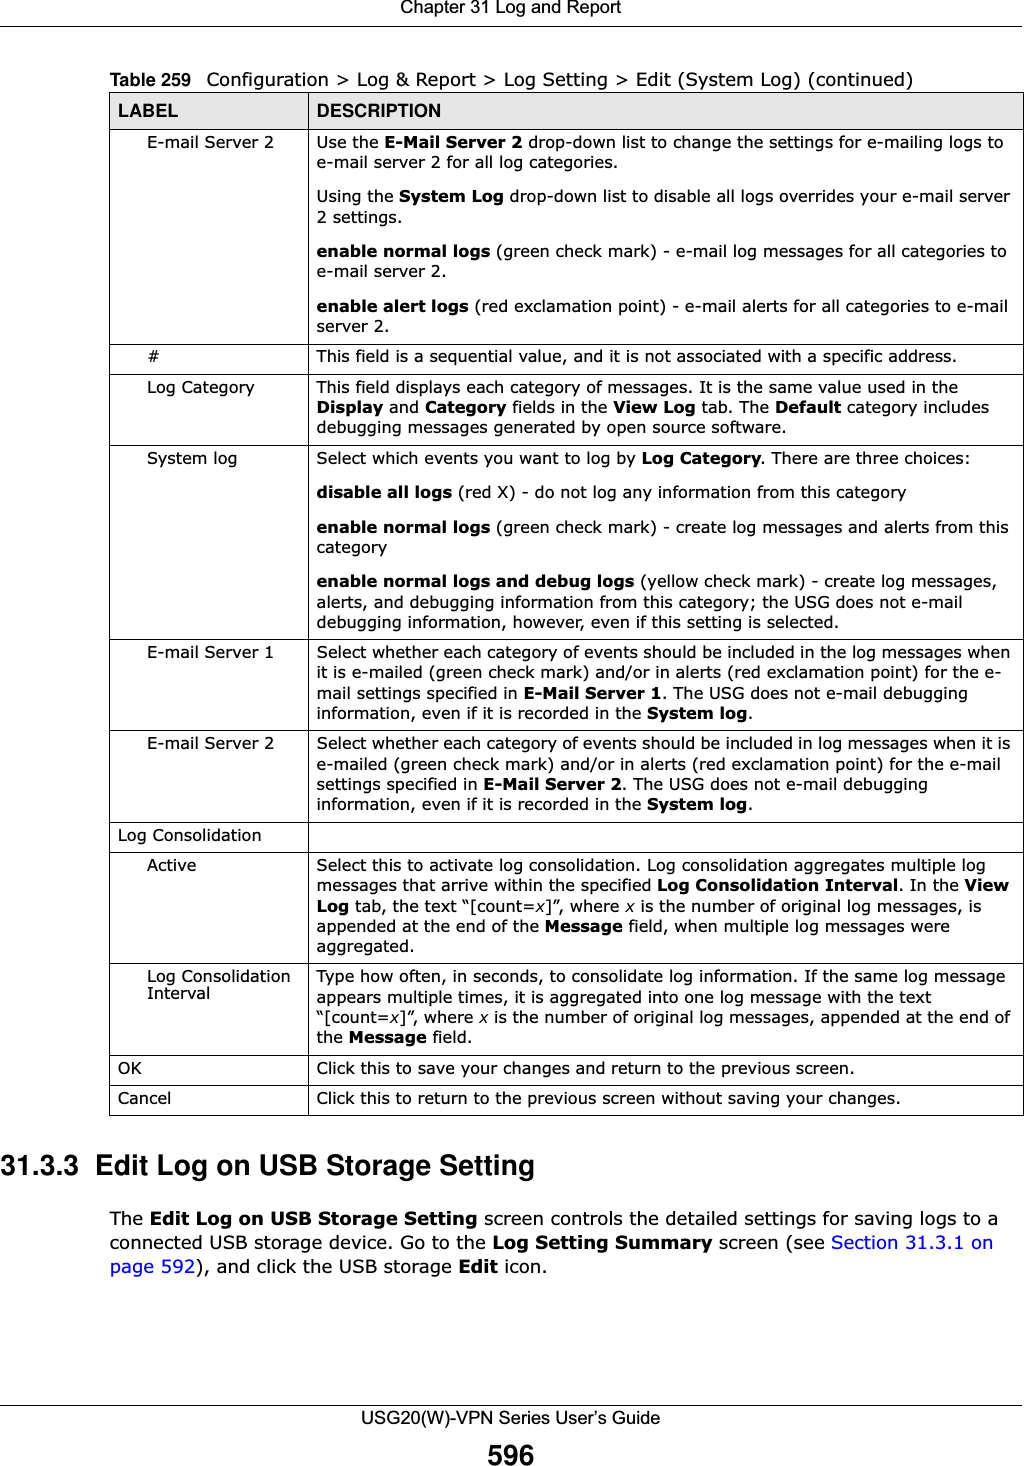 Chapter 31 Log and ReportUSG20(W)-VPN Series User’s Guide59631.3.3  Edit Log on USB Storage Setting The Edit Log on USB Storage Setting screen controls the detailed settings for saving logs to a connected USB storage device. Go to the Log Setting Summary screen (see Section 31.3.1 on page 592), and click the USB storage Edit icon. E-mail Server 2 Use the E-Mail Server 2 drop-down list to change the settings for e-mailing logs to e-mail server 2 for all log categories.Using the System Log drop-down list to disable all logs overrides your e-mail server 2 settings.enable normal logs (green check mark) - e-mail log messages for all categories to e-mail server 2.enable alert logs (red exclamation point) - e-mail alerts for all categories to e-mail server 2.# This field is a sequential value, and it is not associated with a specific address.Log Category This field displays each category of messages. It is the same value used in the Display and Category fields in the View Log tab. The Default category includes debugging messages generated by open source software.System log Select which events you want to log by Log Category. There are three choices:disable all logs (red X) - do not log any information from this categoryenable normal logs (green check mark) - create log messages and alerts from this categoryenable normal logs and debug logs (yellow check mark) - create log messages, alerts, and debugging information from this category; the USG does not e-mail debugging information, however, even if this setting is selected.E-mail Server 1 Select whether each category of events should be included in the log messages when it is e-mailed (green check mark) and/or in alerts (red exclamation point) for the e-mail settings specified in E-Mail Server 1. The USG does not e-mail debugging information, even if it is recorded in the System log.E-mail Server 2 Select whether each category of events should be included in log messages when it is e-mailed (green check mark) and/or in alerts (red exclamation point) for the e-mail settings specified in E-Mail Server 2. The USG does not e-mail debugging information, even if it is recorded in the System log.Log ConsolidationActive Select this to activate log consolidation. Log consolidation aggregates multiple log messages that arrive within the specified Log Consolidation Interval. In the View Log tab, the text “[count=x]”, where x is the number of original log messages, is appended at the end of the Message field, when multiple log messages were aggregated.Log Consolidation Interval Type how often, in seconds, to consolidate log information. If the same log message appears multiple times, it is aggregated into one log message with the text “[count=x]”, where x is the number of original log messages, appended at the end of the Message field.OK Click this to save your changes and return to the previous screen.Cancel Click this to return to the previous screen without saving your changes.Table 259   Configuration &gt; Log &amp; Report &gt; Log Setting &gt; Edit (System Log) (continued)LABEL DESCRIPTION